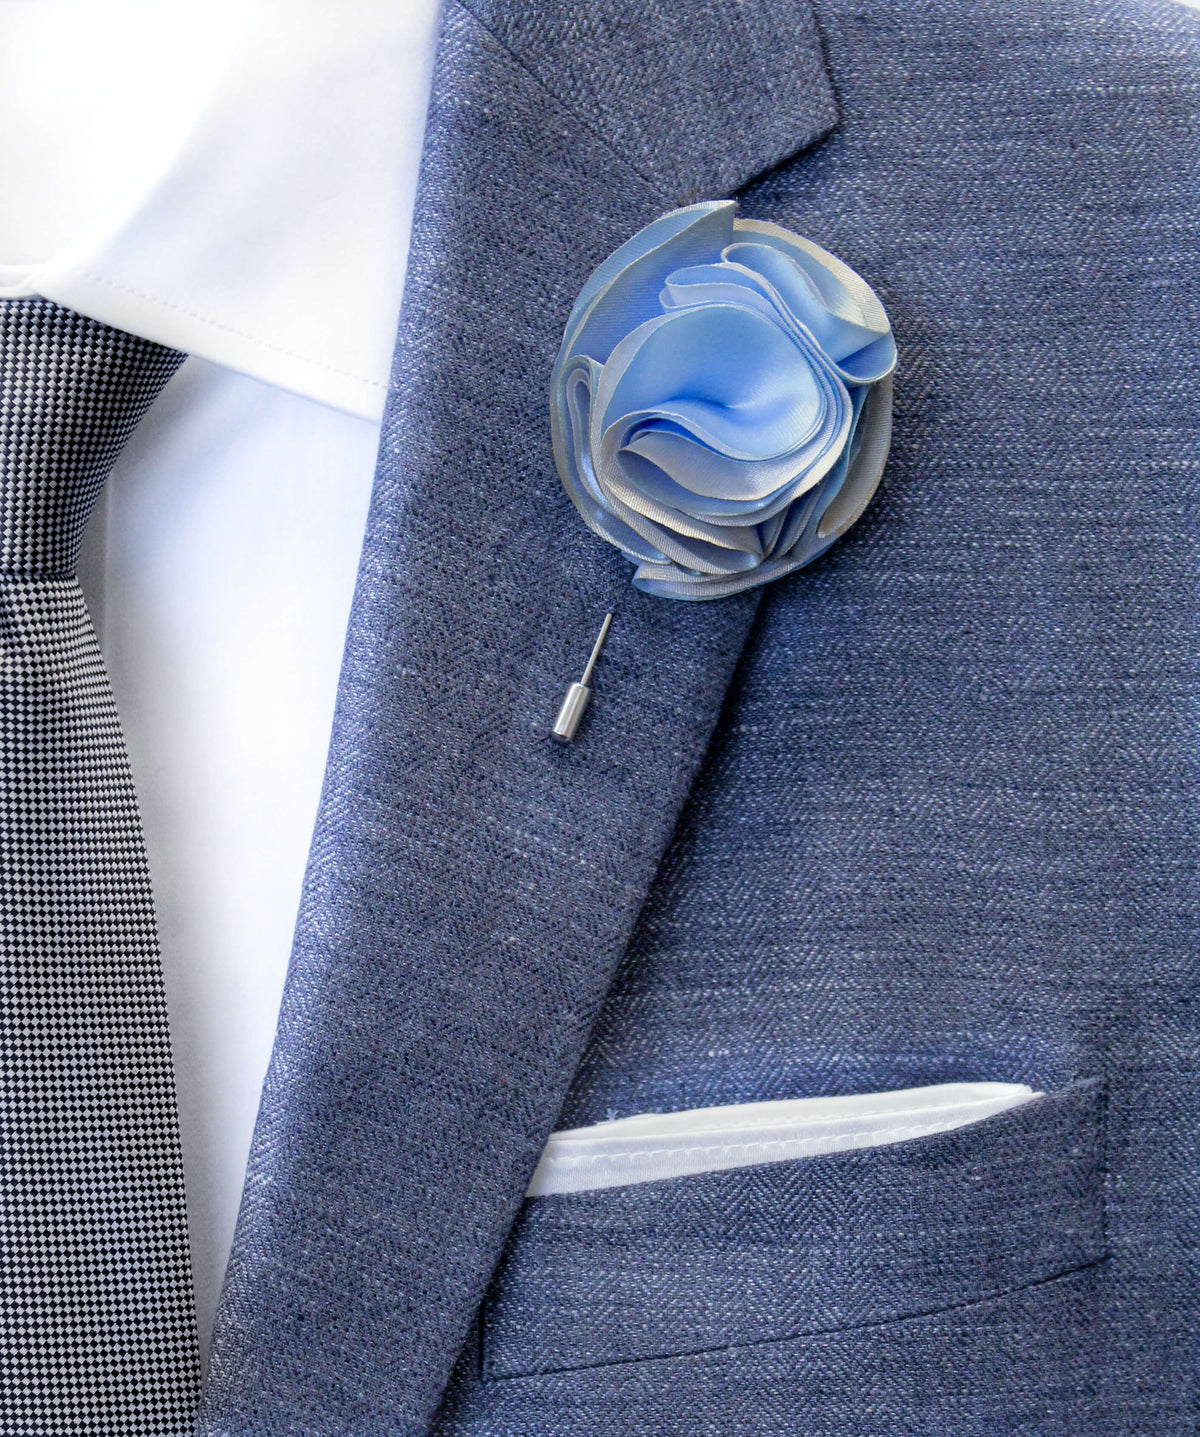 Shades of Blue Flower Lapel Pin